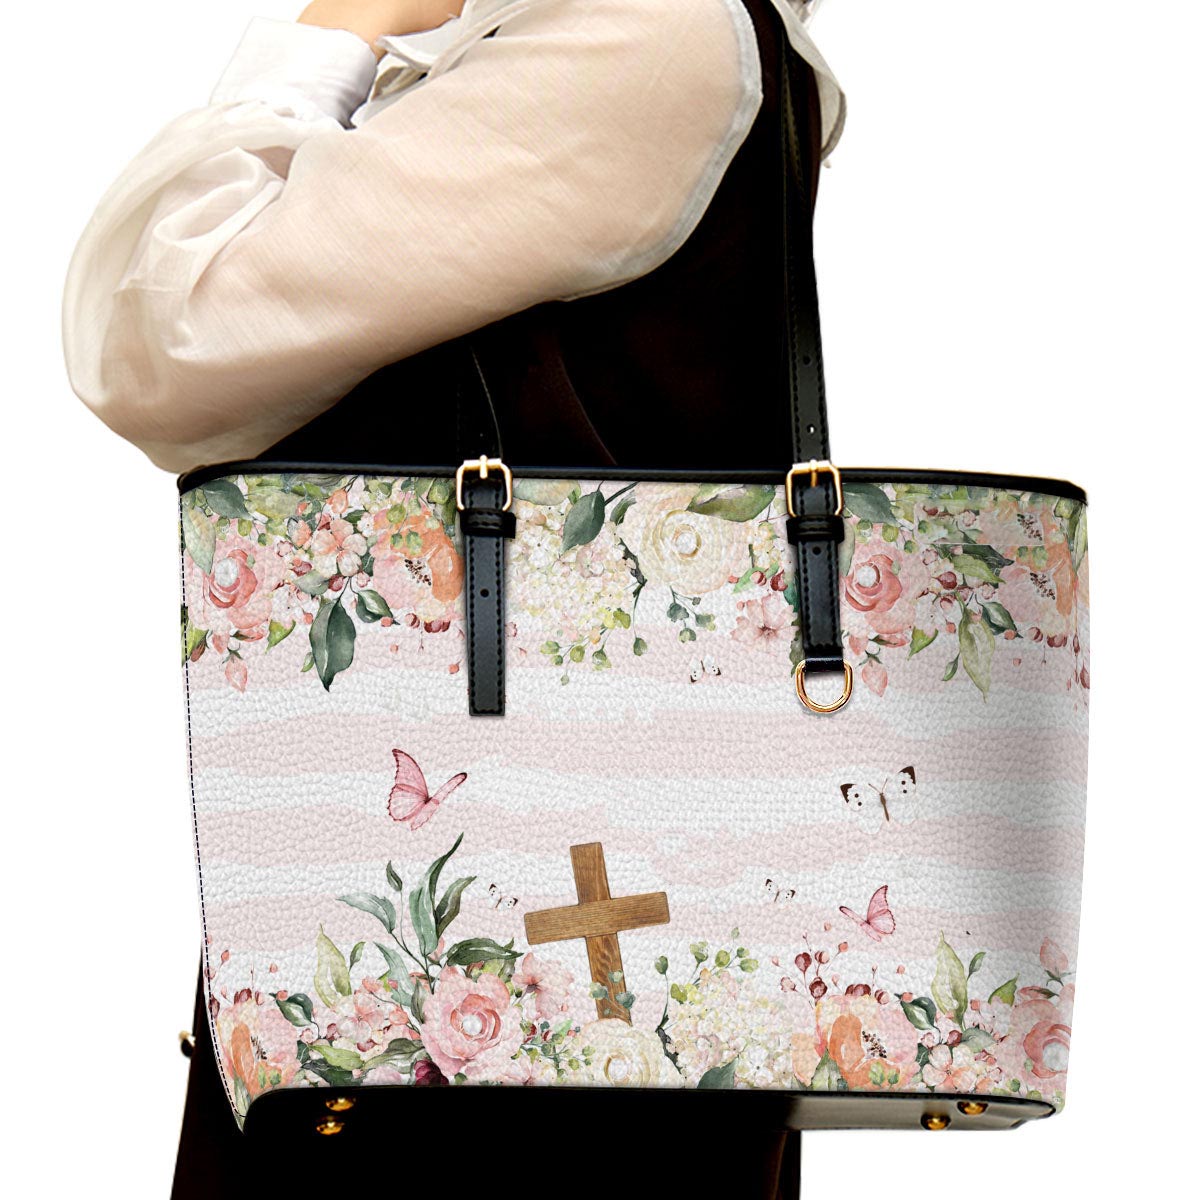 Pretty Cross Large Pu Leather Tote Bag For Women - Mom Gifts For Mothers Day